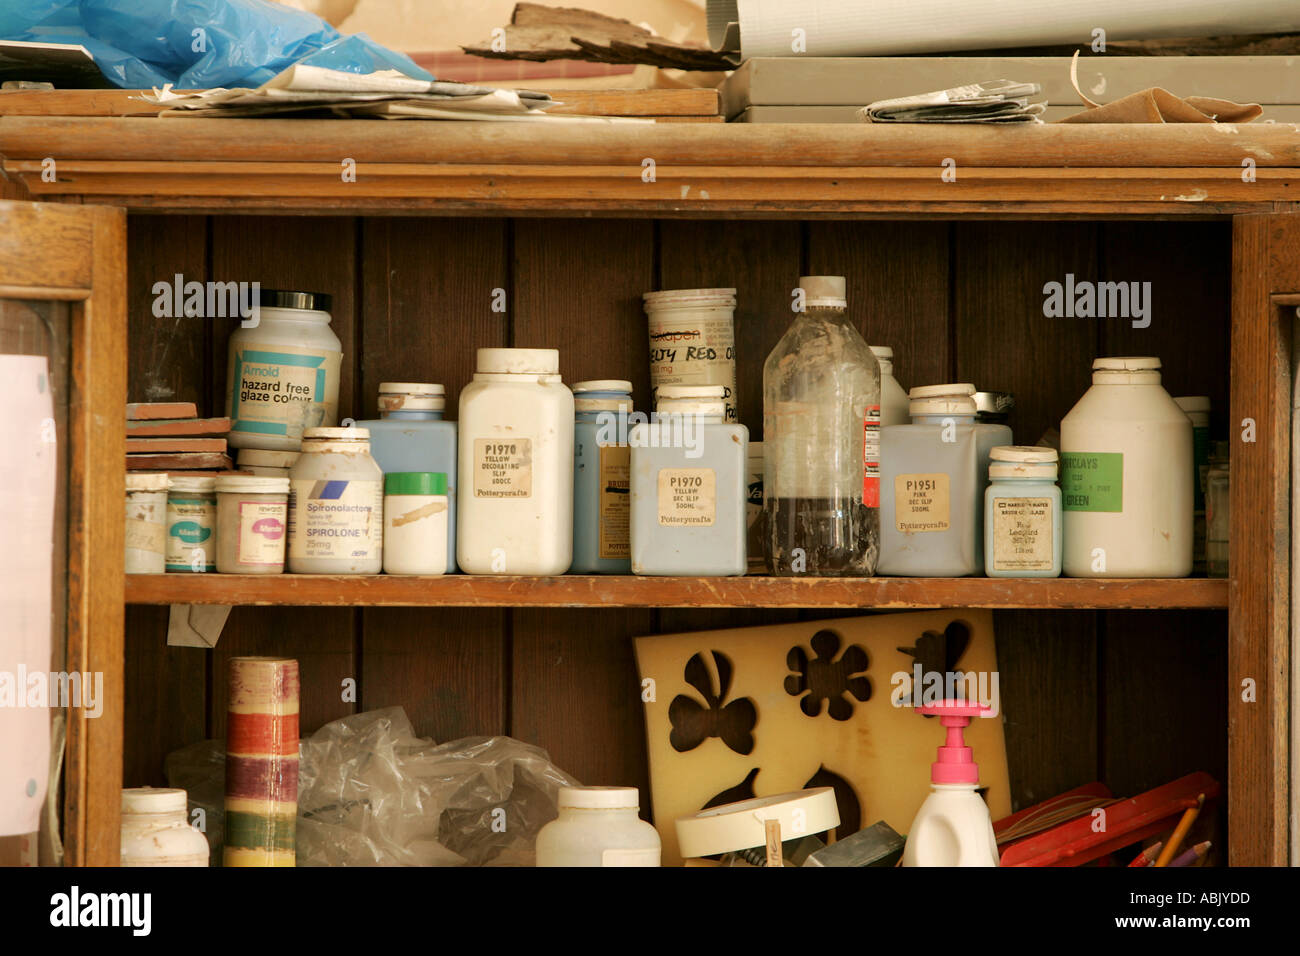 shelf of artistic pottery school bottles of paints paint and chemicals plastic bottles arranged on a shelf messy spotty stains Stock Photo